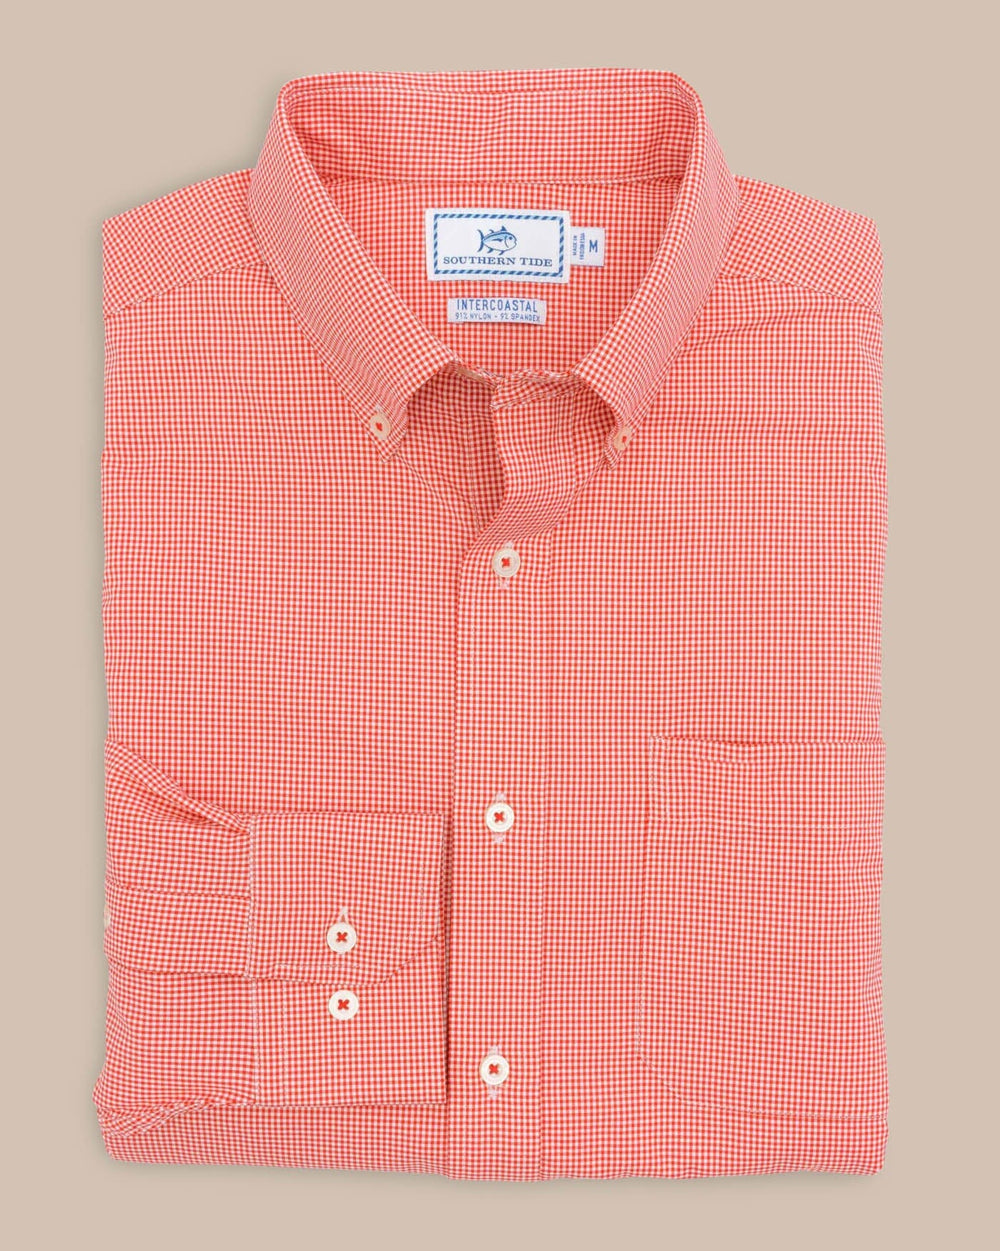 The front view of the Southern Tide Team Colors Gingham Intercoastal Sport Shirt by Southern Tide - Endzone Orange